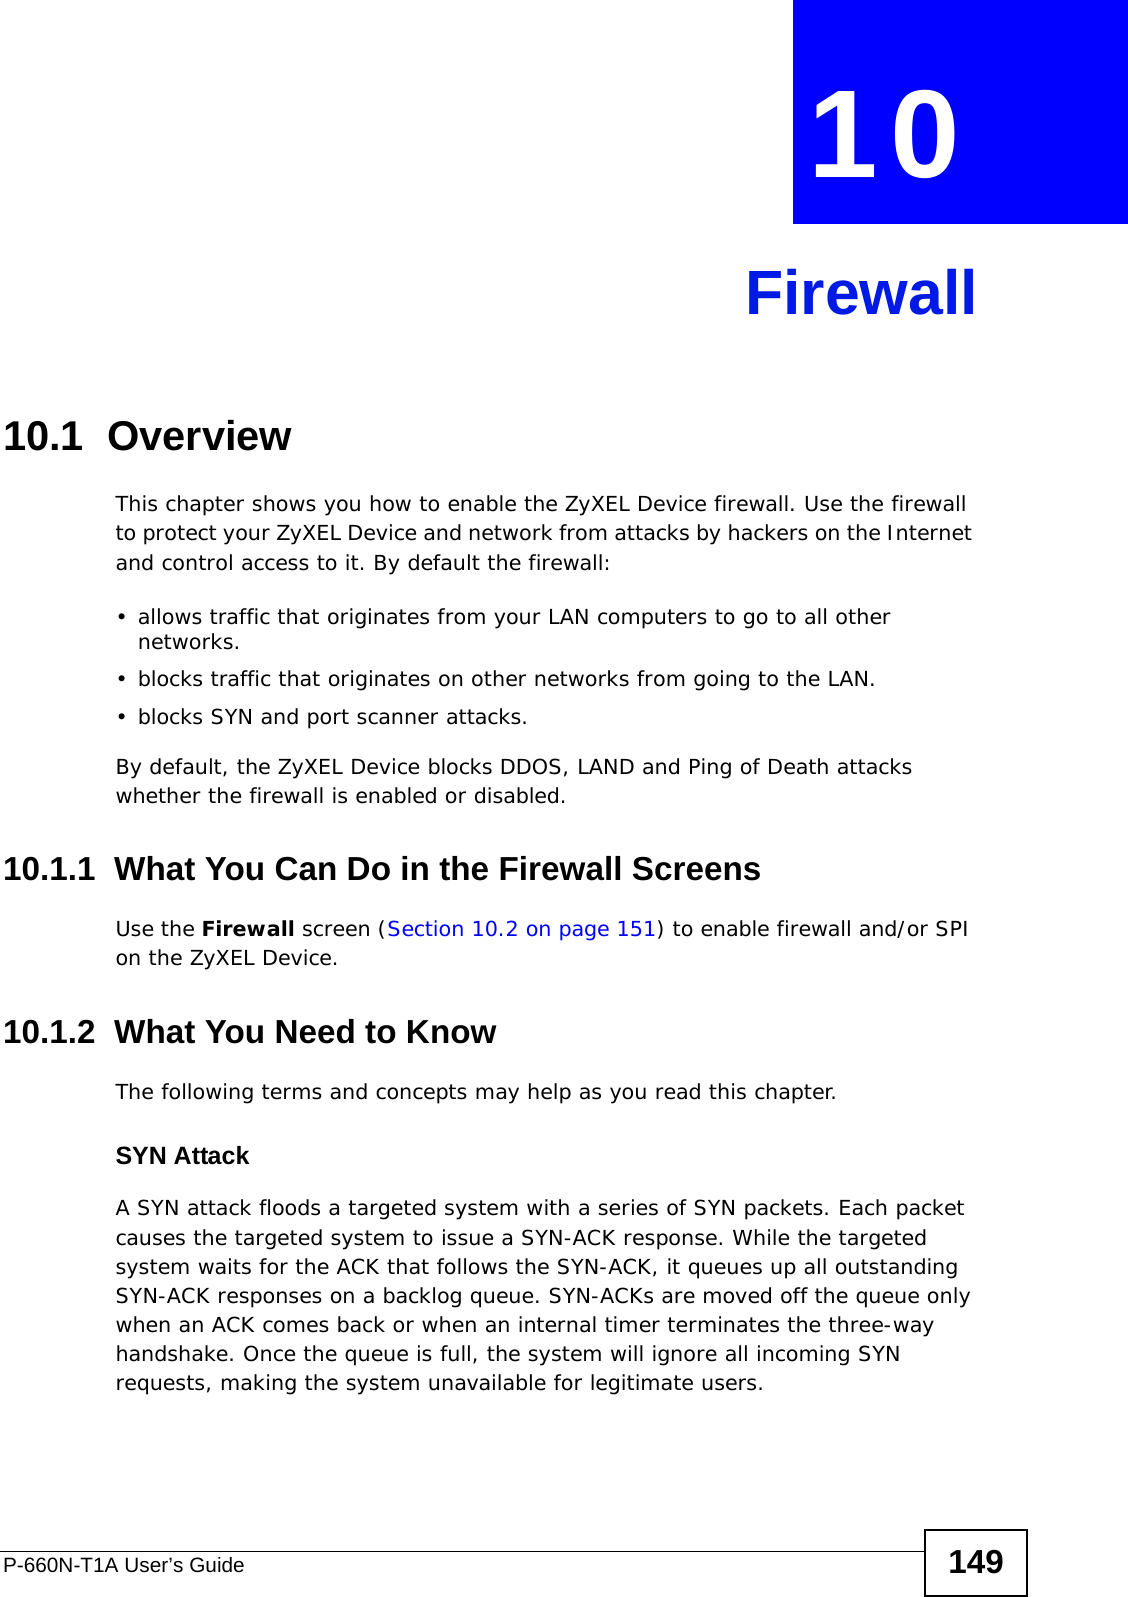 P-660N-T1A User’s Guide 149CHAPTER  10 Firewall10.1  OverviewThis chapter shows you how to enable the ZyXEL Device firewall. Use the firewall to protect your ZyXEL Device and network from attacks by hackers on the Internet and control access to it. By default the firewall:• allows traffic that originates from your LAN computers to go to all other networks. • blocks traffic that originates on other networks from going to the LAN.• blocks SYN and port scanner attacks.By default, the ZyXEL Device blocks DDOS, LAND and Ping of Death attacks whether the firewall is enabled or disabled.10.1.1  What You Can Do in the Firewall ScreensUse the Firewall screen (Section 10.2 on page 151) to enable firewall and/or SPI on the ZyXEL Device.10.1.2  What You Need to KnowThe following terms and concepts may help as you read this chapter.SYN AttackA SYN attack floods a targeted system with a series of SYN packets. Each packet causes the targeted system to issue a SYN-ACK response. While the targeted system waits for the ACK that follows the SYN-ACK, it queues up all outstanding SYN-ACK responses on a backlog queue. SYN-ACKs are moved off the queue only when an ACK comes back or when an internal timer terminates the three-way handshake. Once the queue is full, the system will ignore all incoming SYN requests, making the system unavailable for legitimate users.